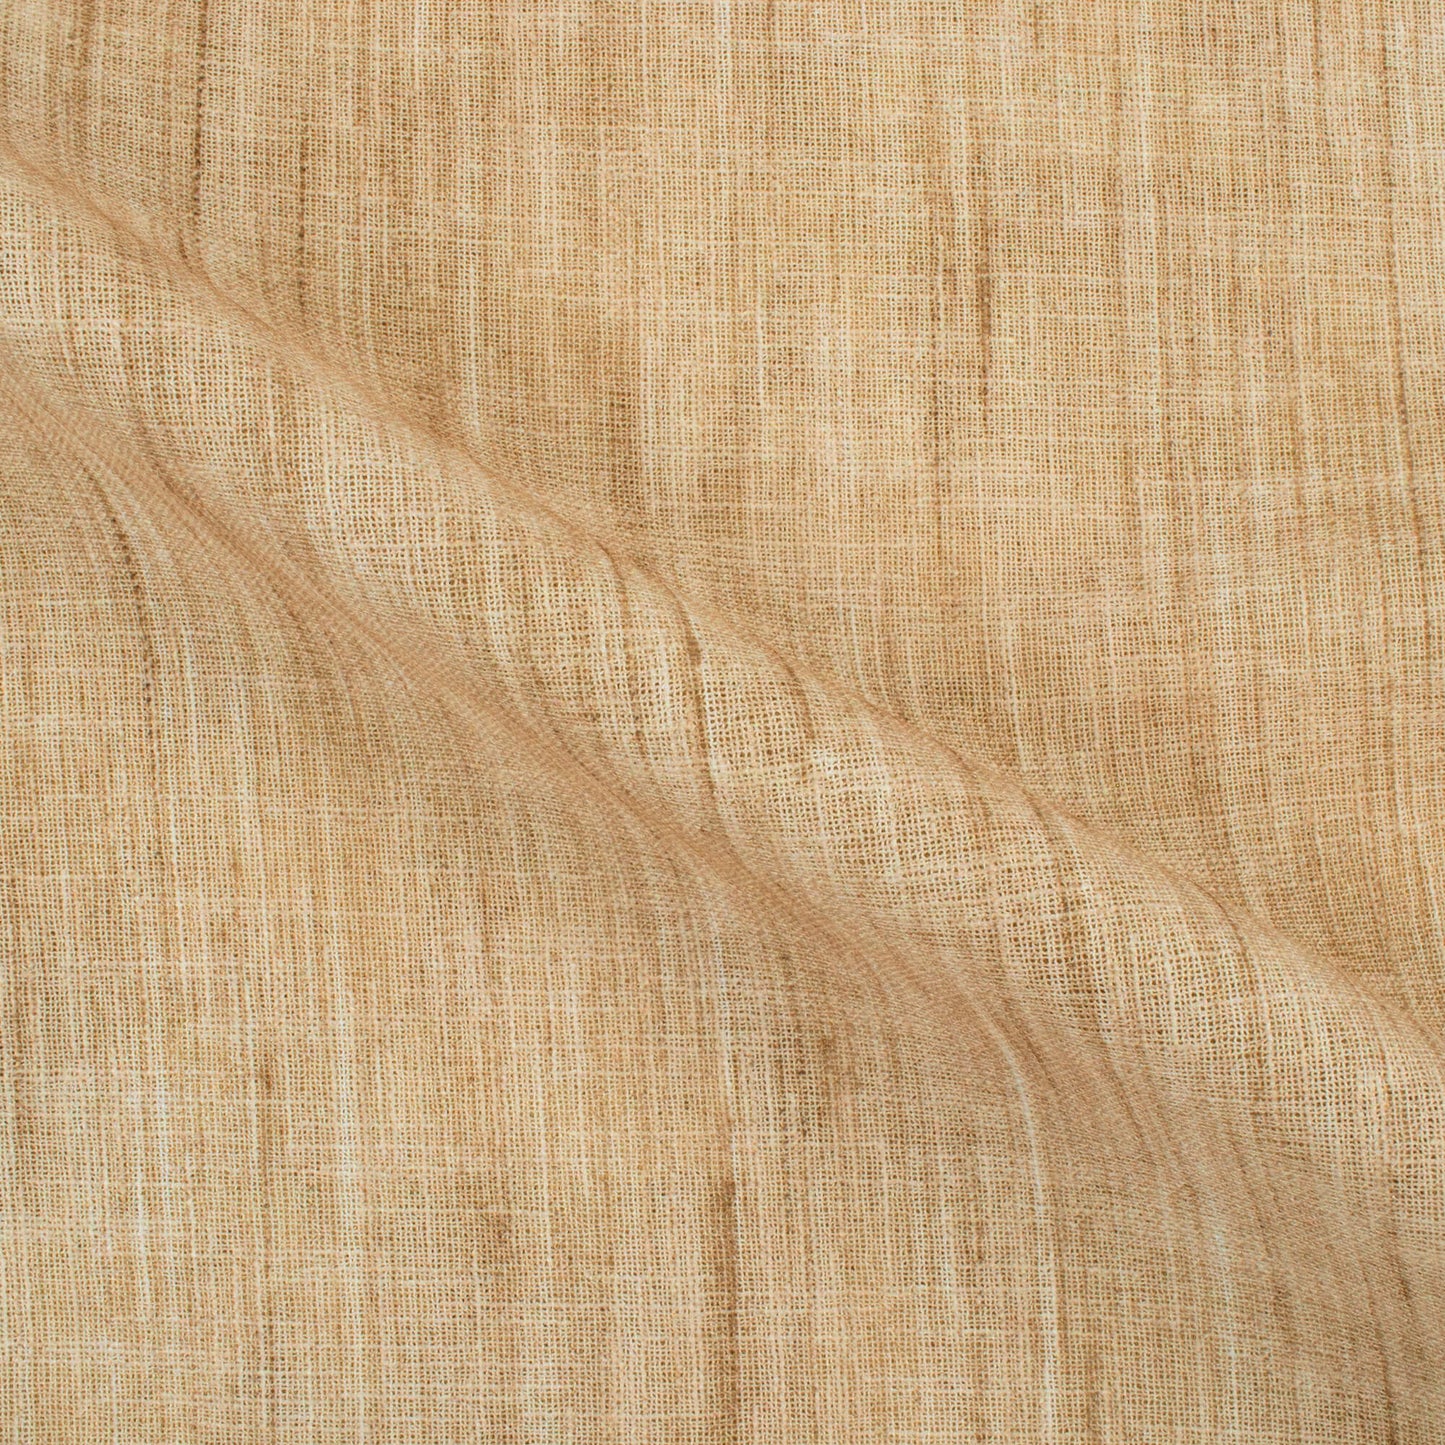 Camel Brown Textured Premium Sheer Fabric (Width 54 Inches)